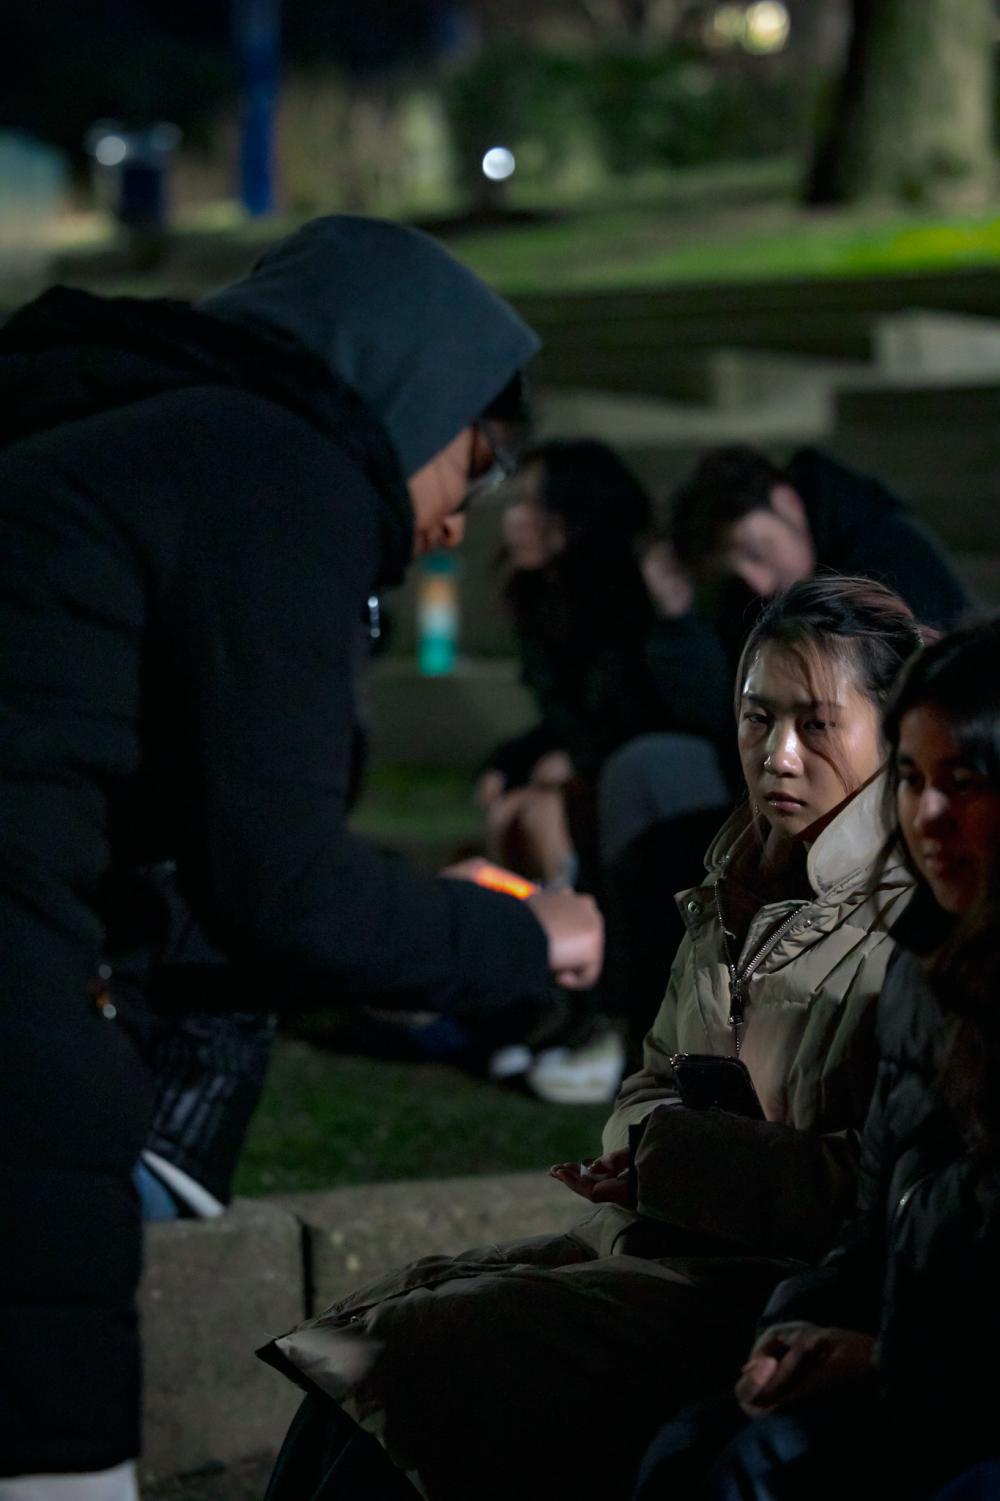 Student-led+vigil+honors+the+victims+of+Monterey+Park+and+Half+Moon+Bay+shooting%3A+a+photo+essay